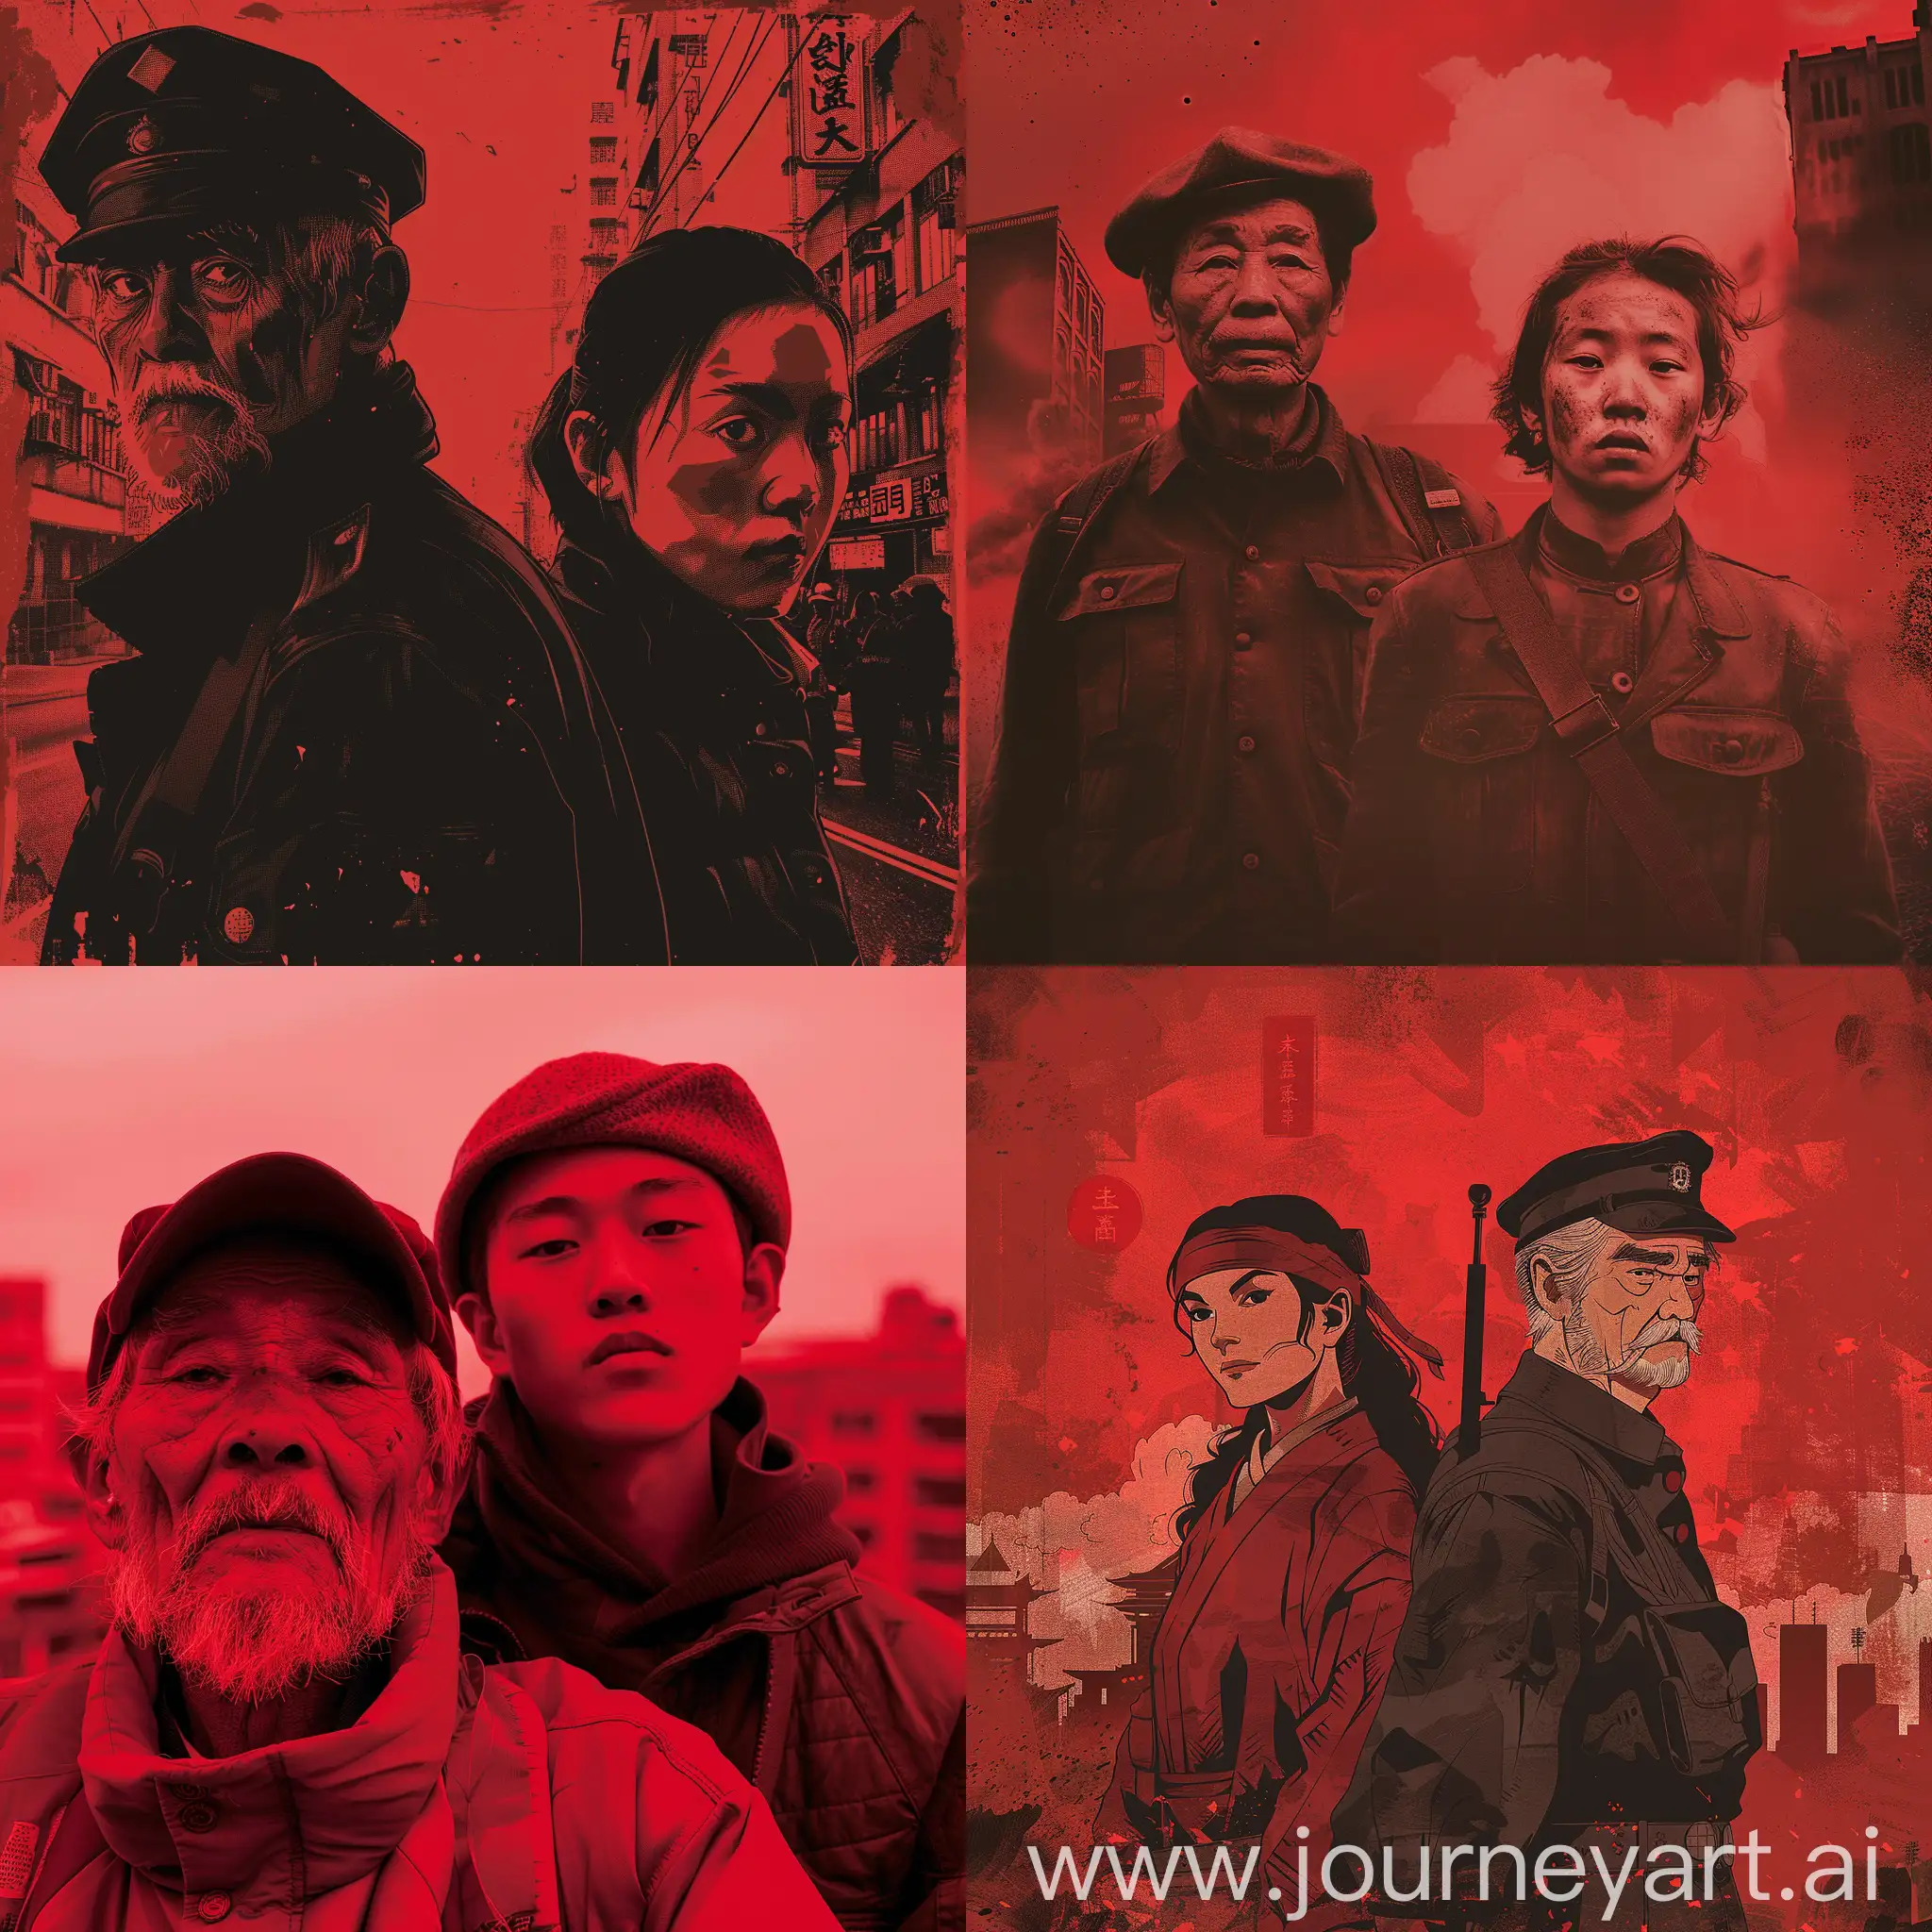 Resolute-Will-Old-Eighth-Route-Army-Guardian-with-Modern-Youth-in-Urban-Red-Tone